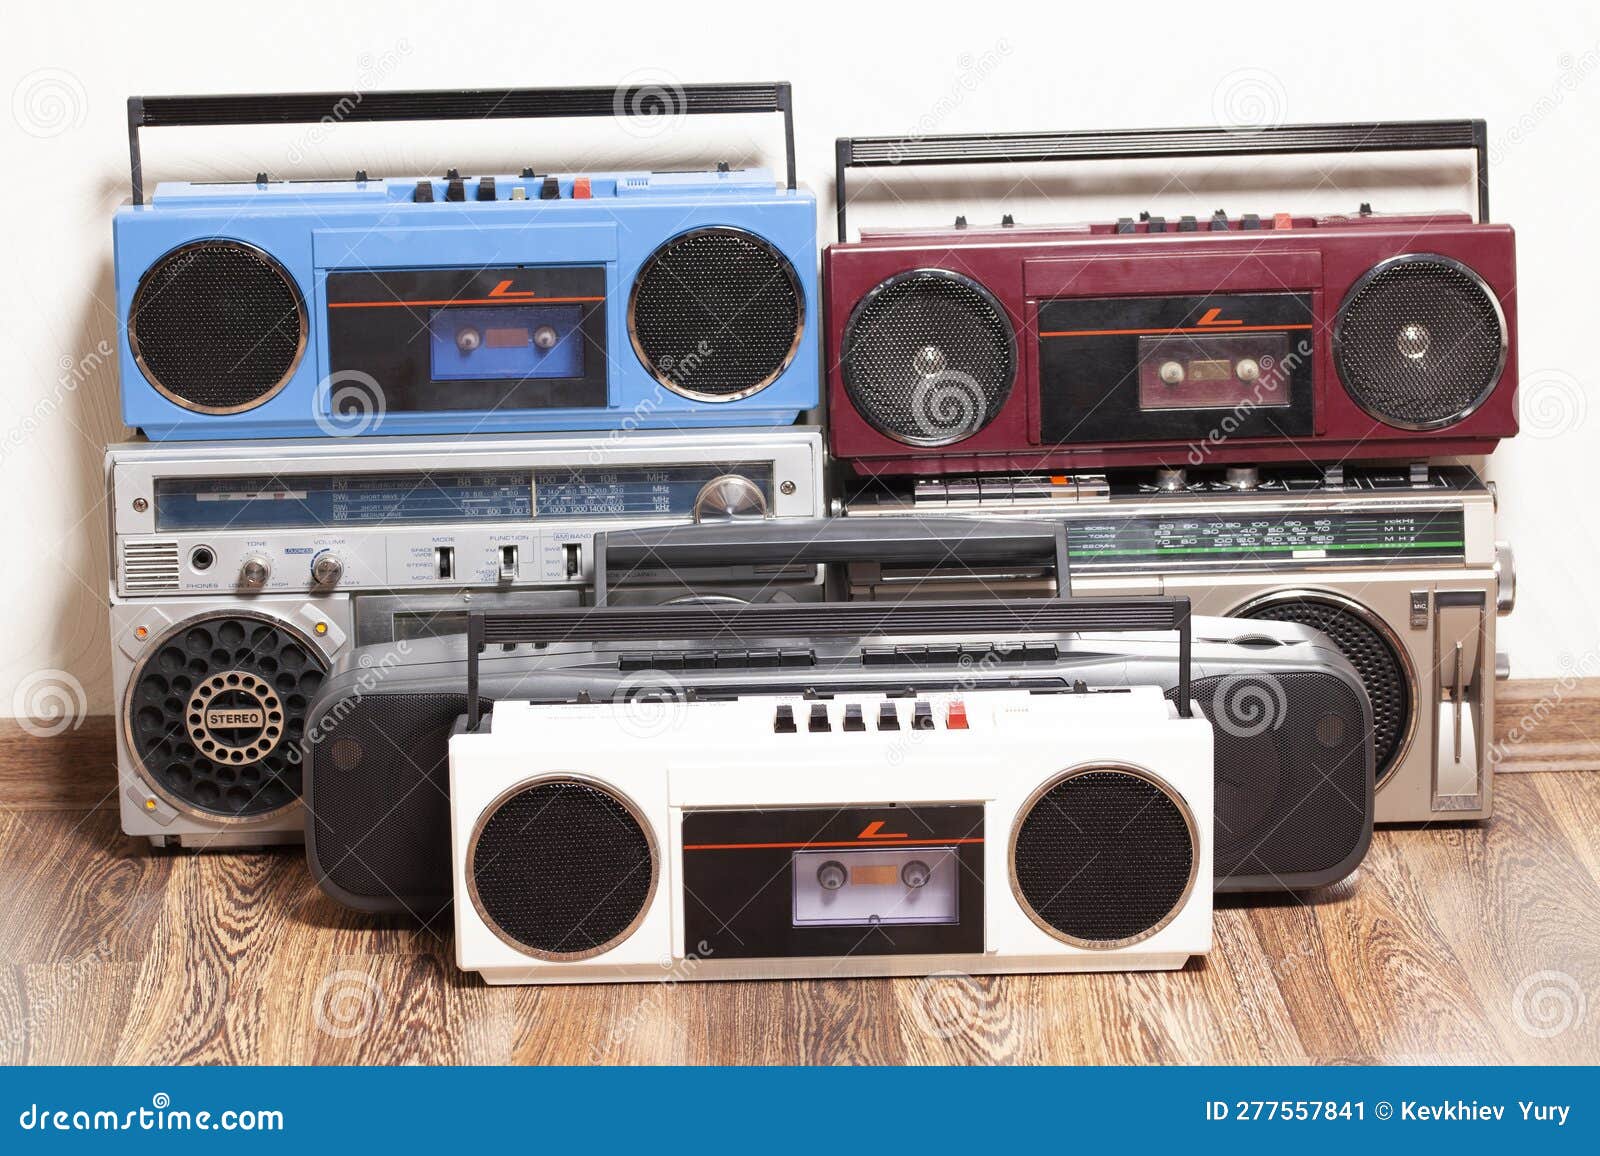 https://thumbs.dreamstime.com/z/collection-old-tape-recorders-collection-old-tape-recorders-277557841.jpg